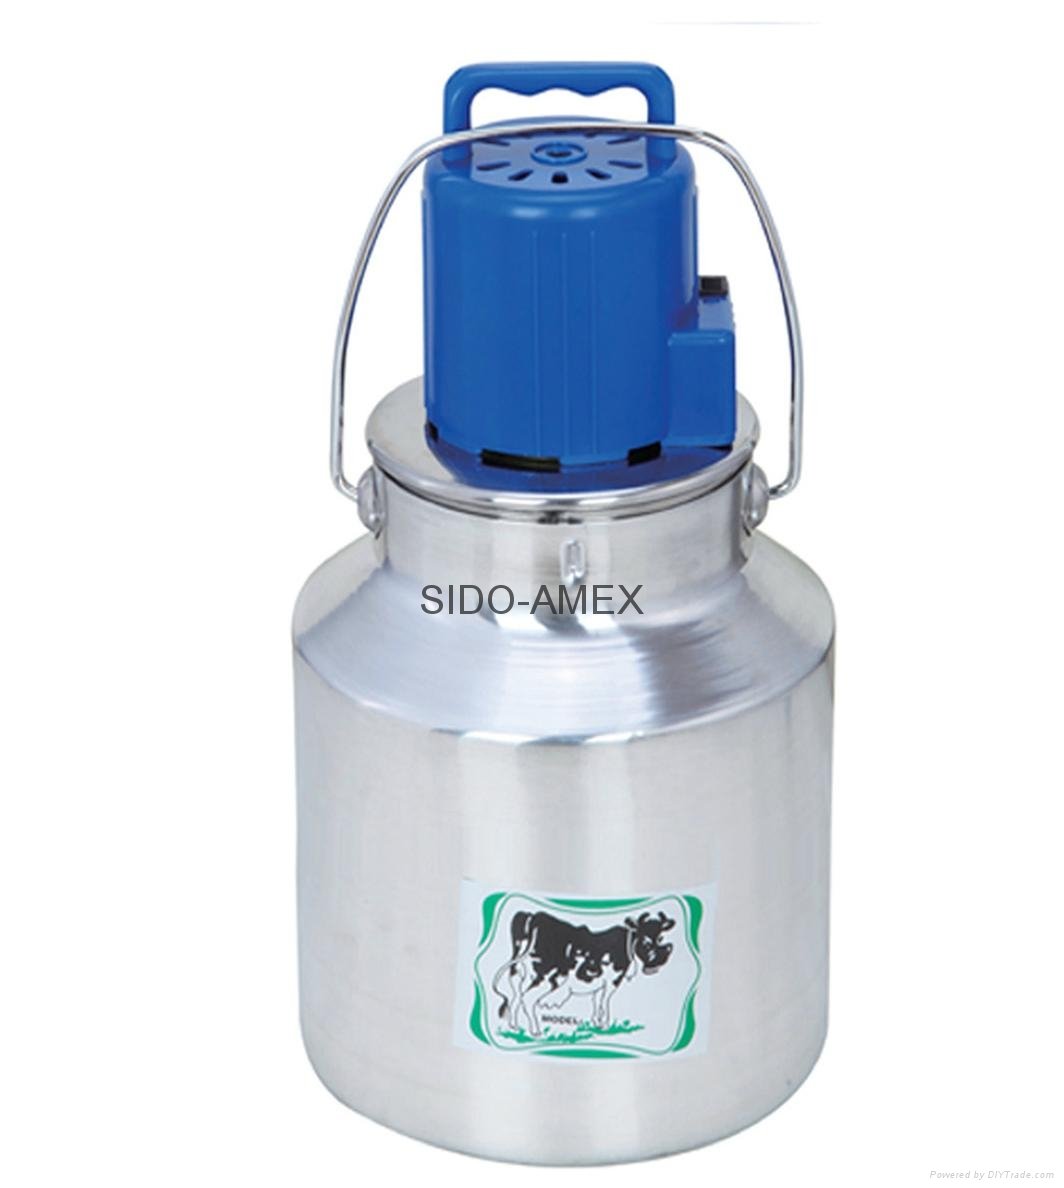 Milk Mixer  Butter Churn  Aluminum Milk Can Plastic Blur motor cover with switch 3